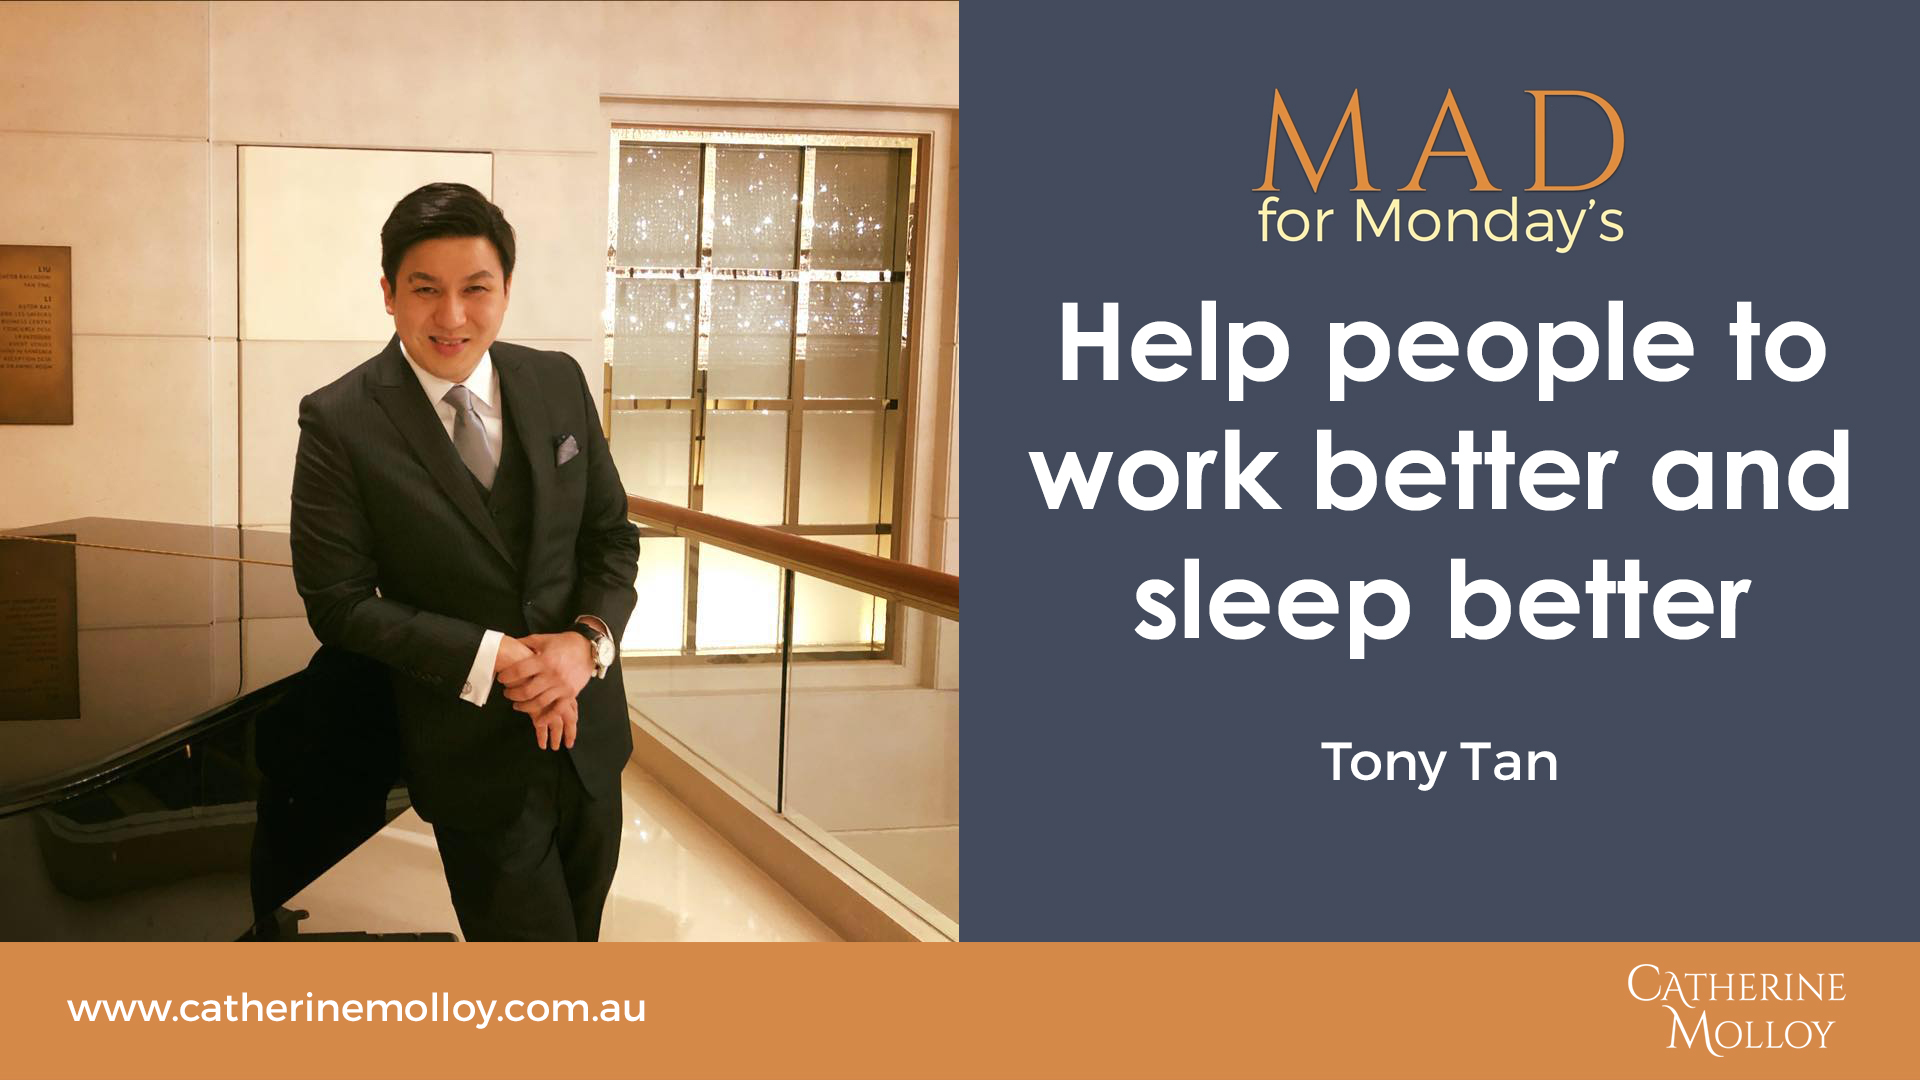 MAD for Monday’s – Help people to work better and sleep better